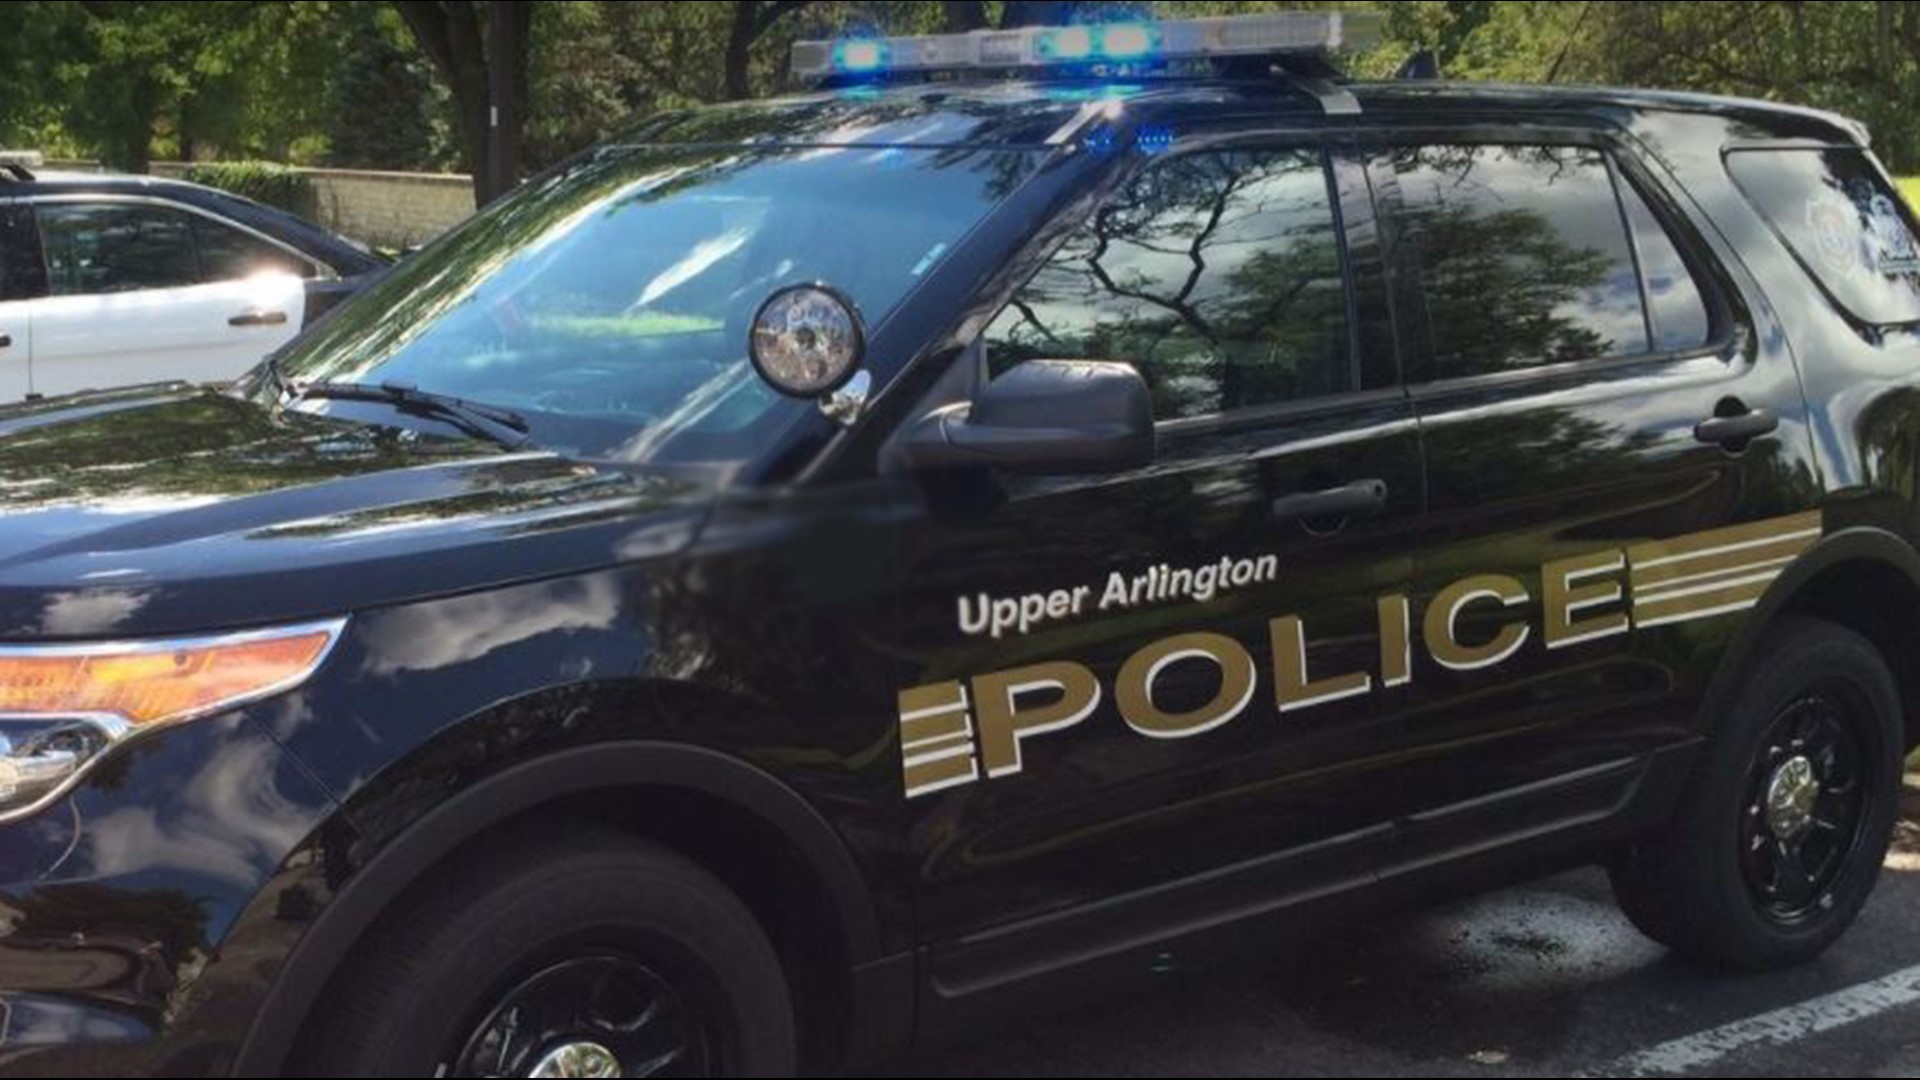 A letter sent to Upper Arlington parents on Tuesday said Joel Cutler was indicted on rape, sexual battery and unlawful sexual conduct with a minor charges.